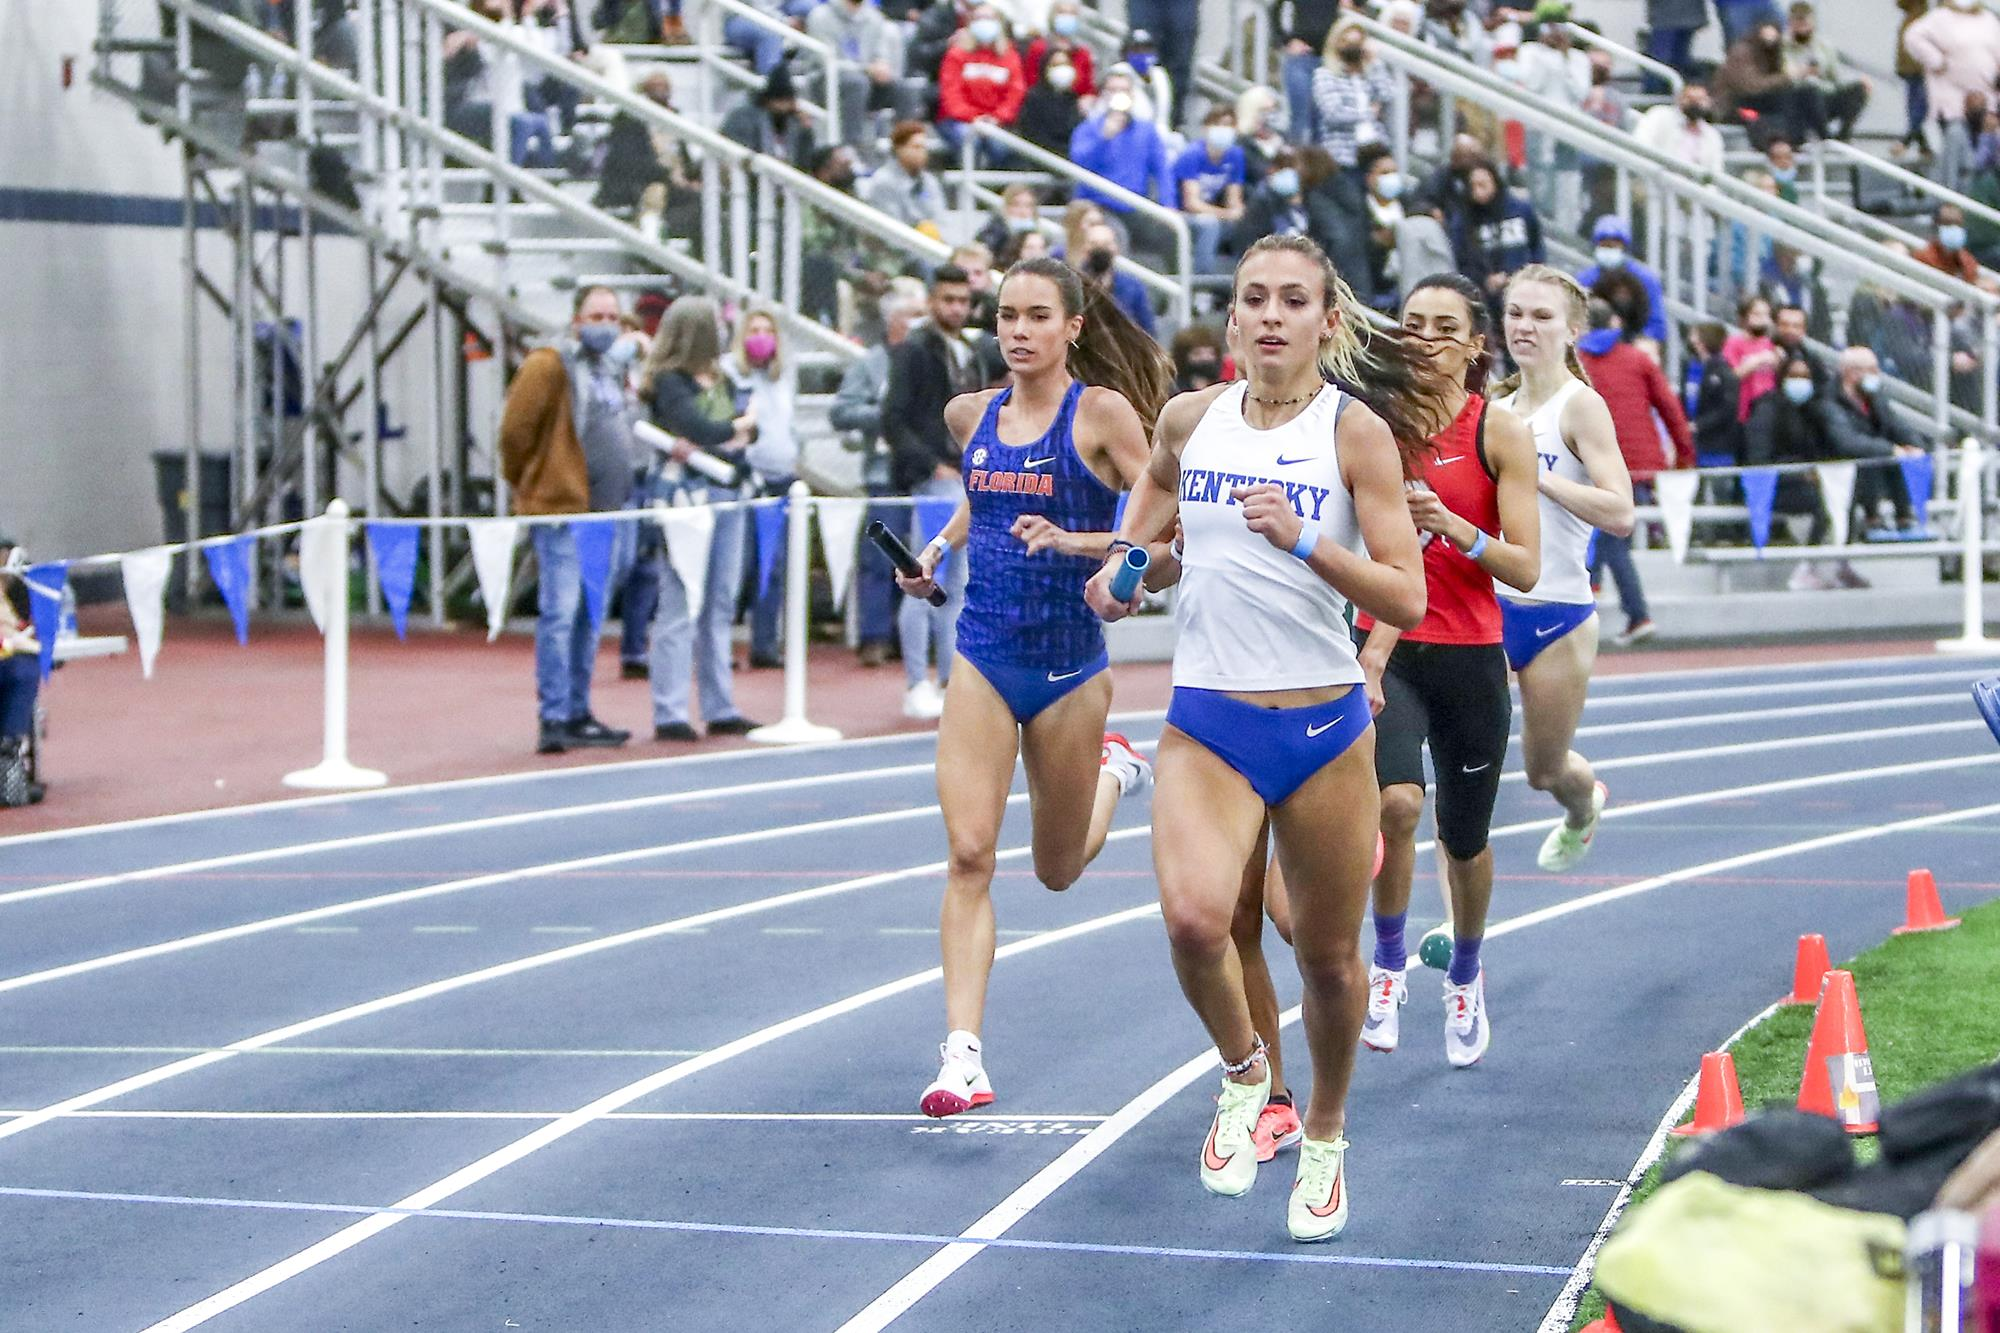 Pole Vaulters and Distance Runners Earn Three Personal Bests on Double Meet Day for UKTF